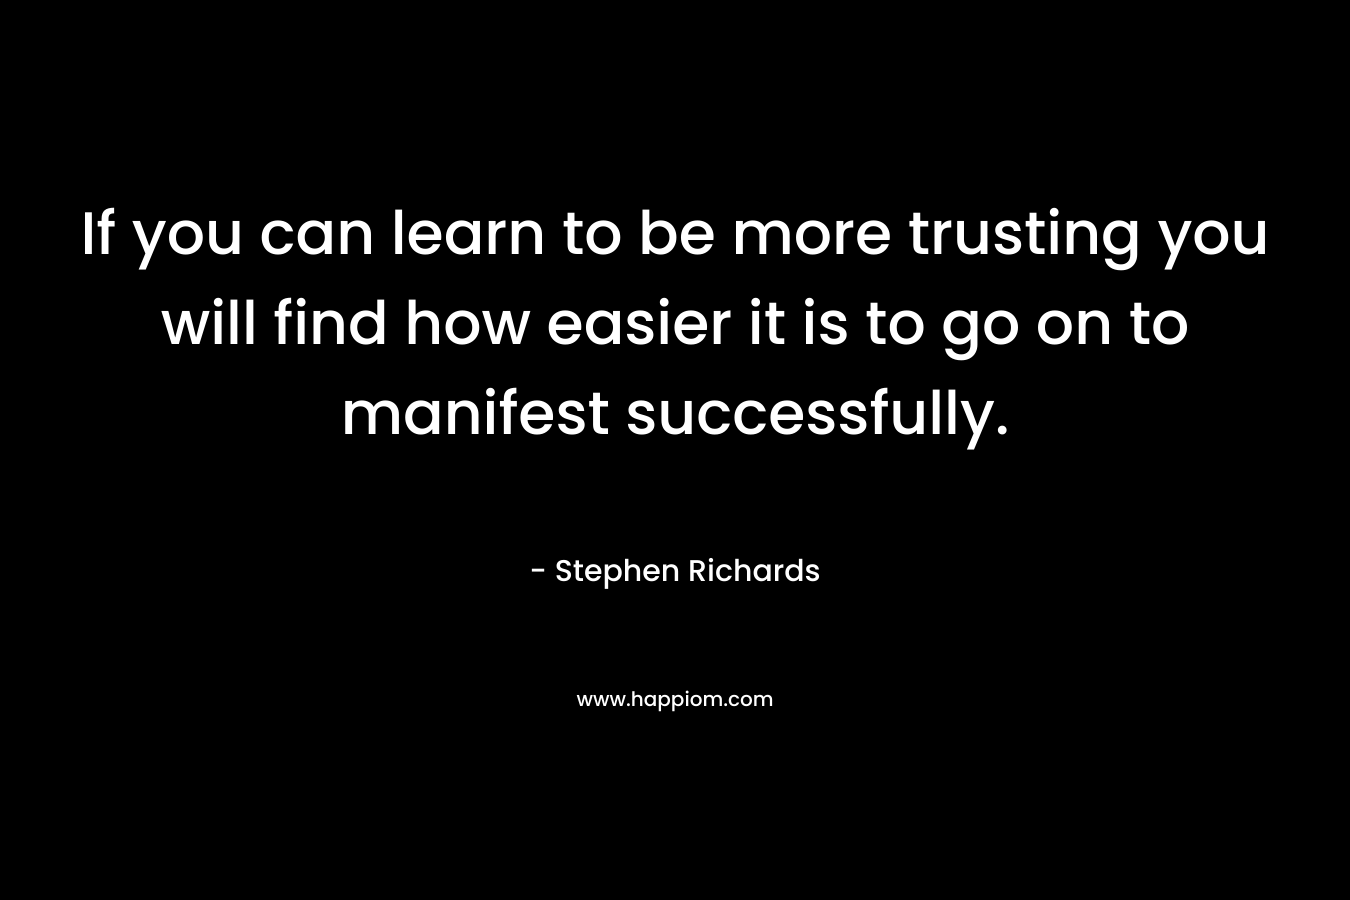 If you can learn to be more trusting you will find how easier it is to go on to manifest successfully. – Stephen Richards